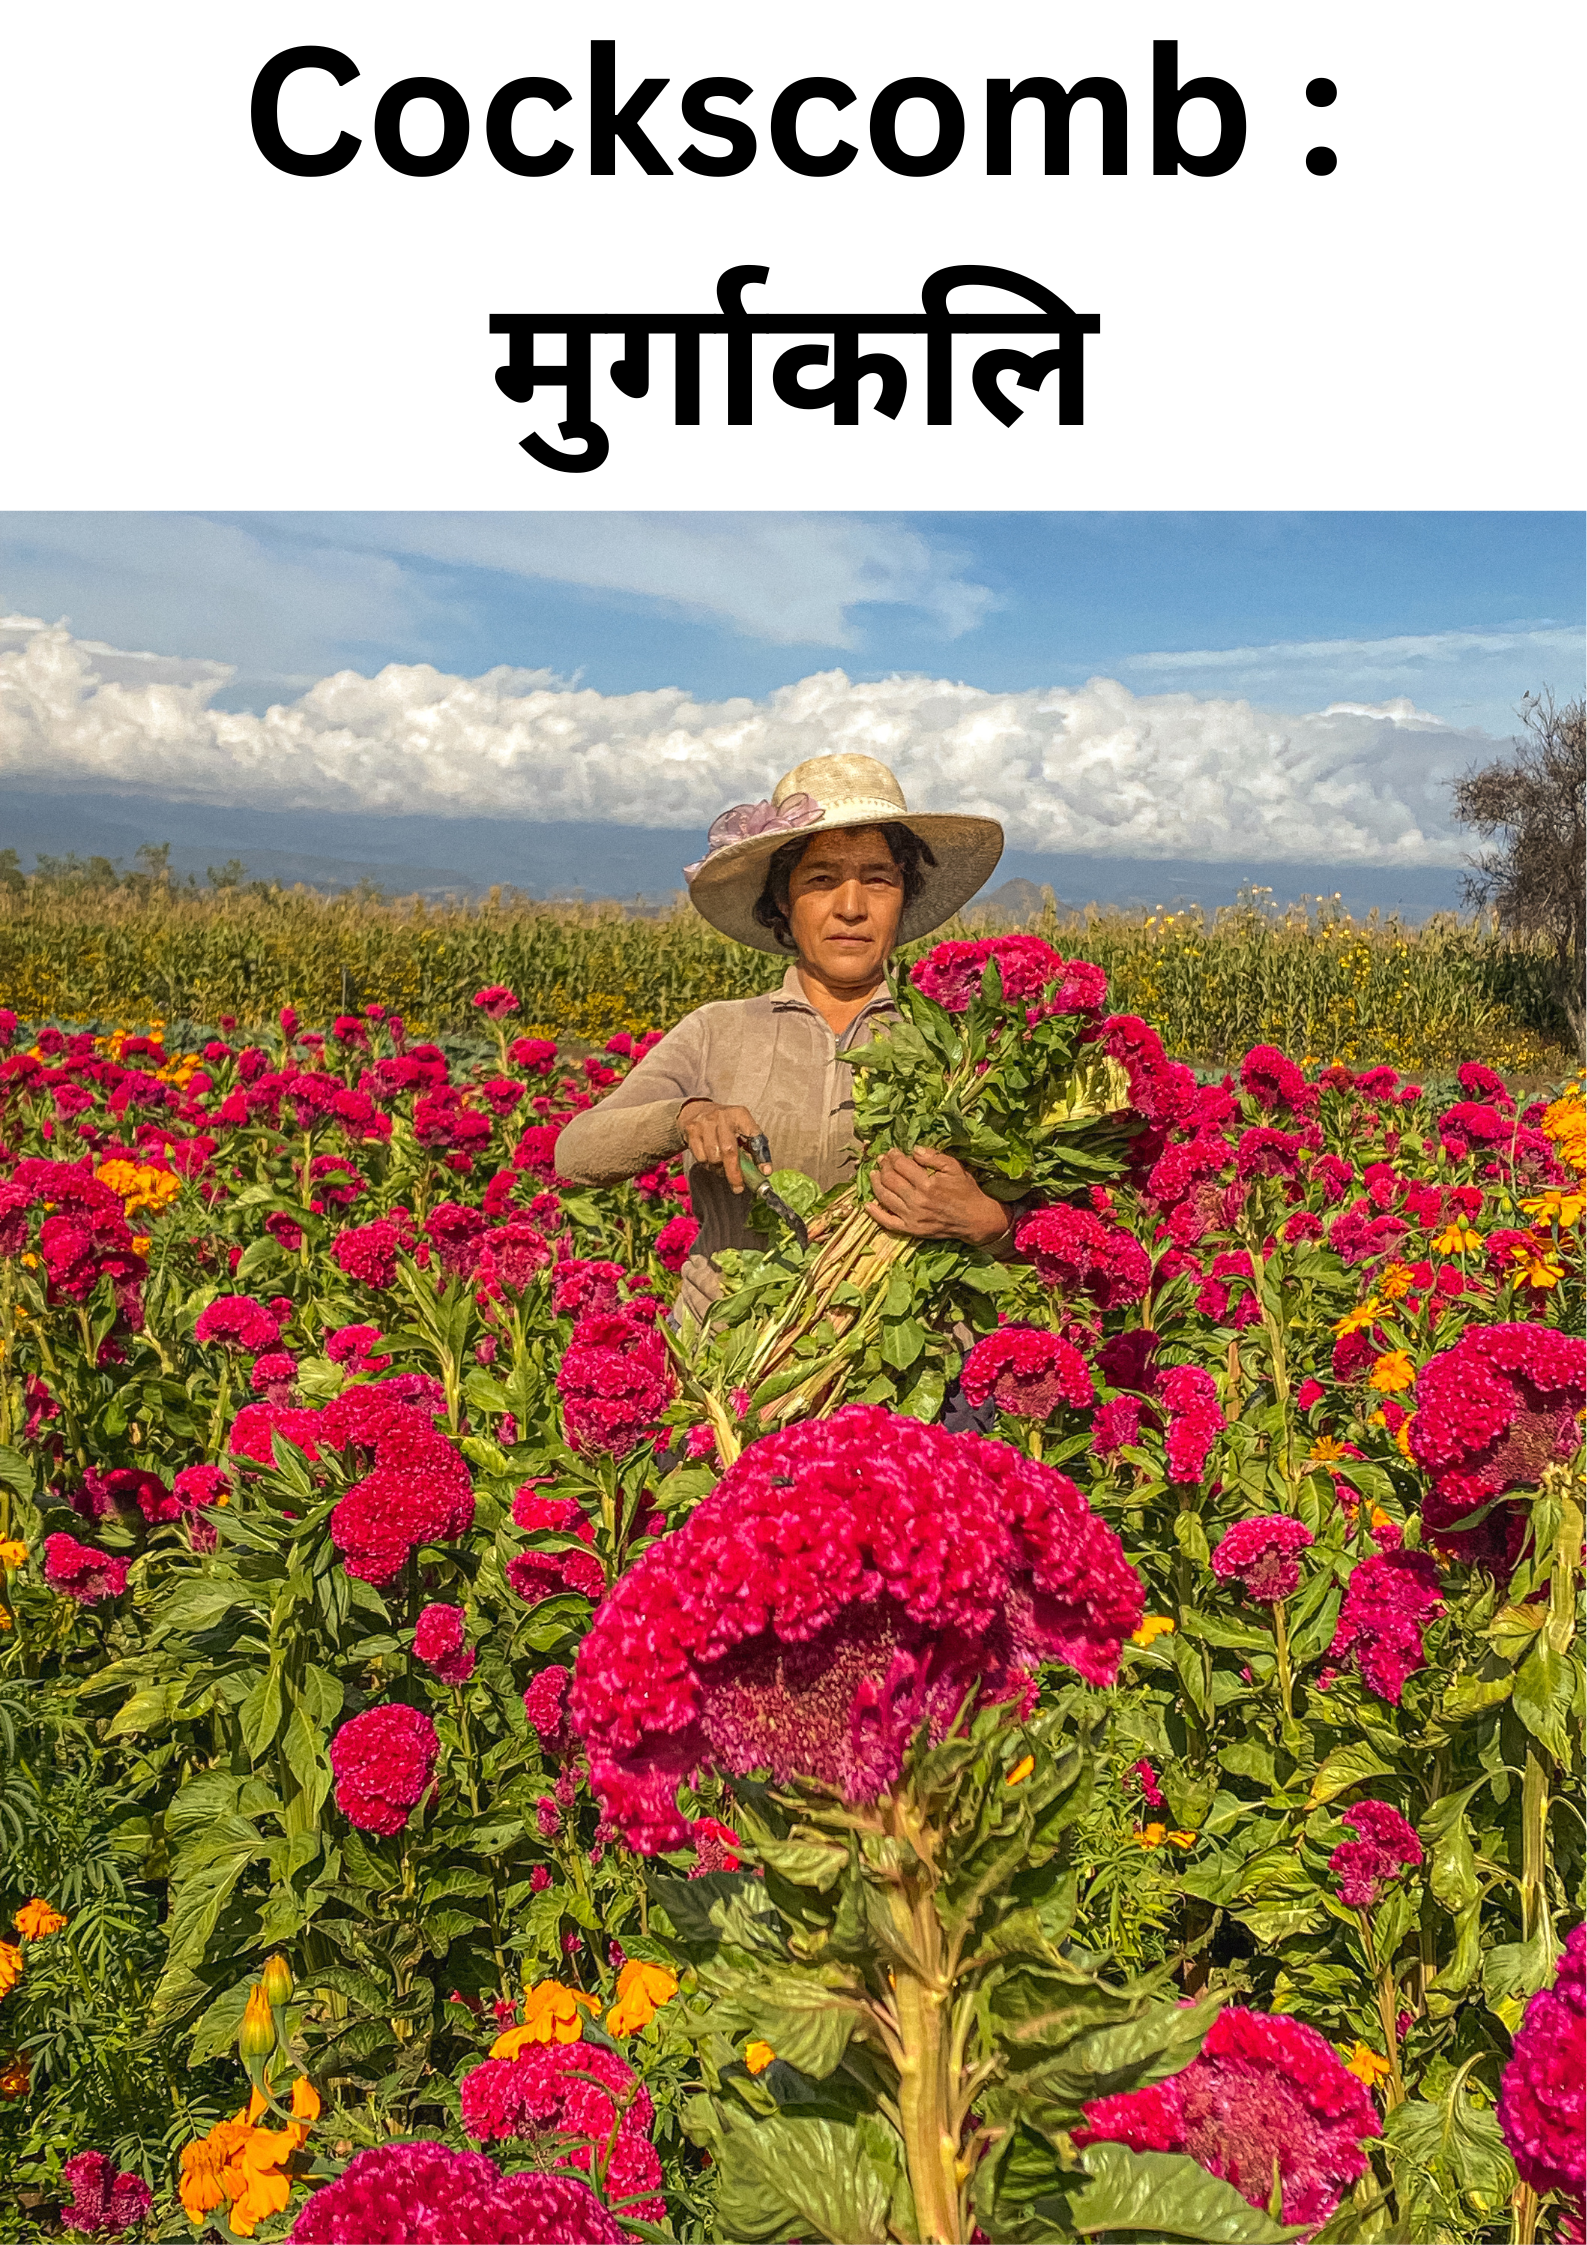 मुर्गाकली के फूल : About Cockscomb flower in hindi